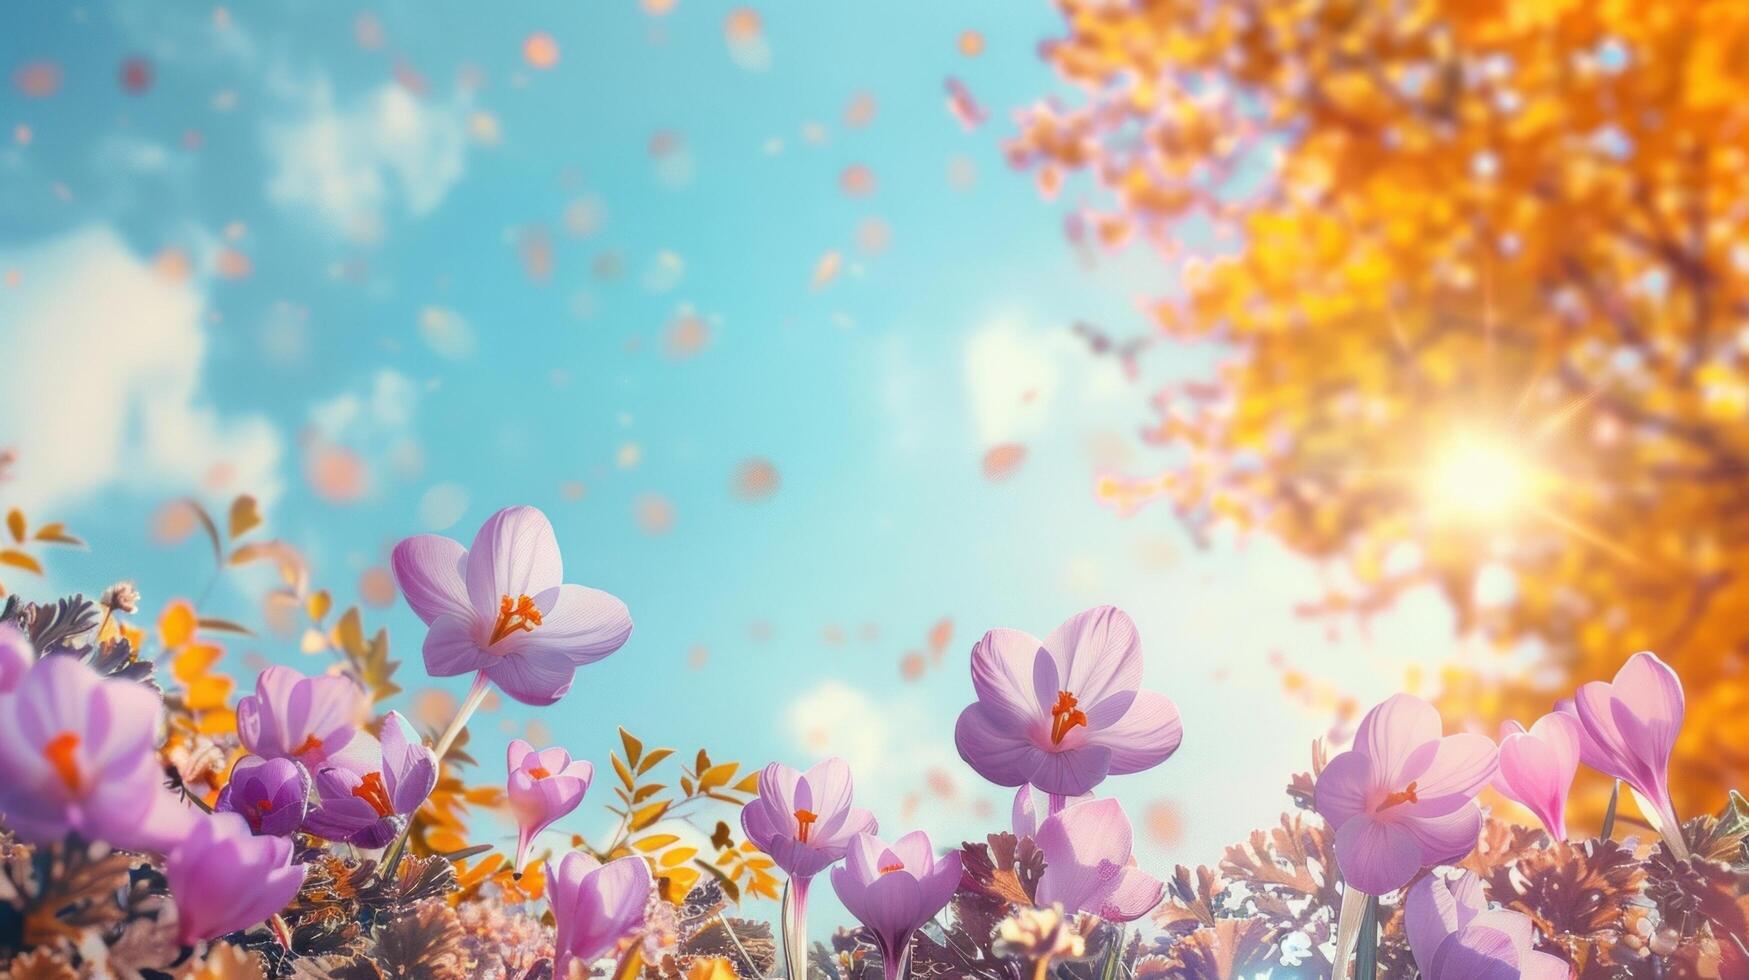 AI generated Autumnal Scene with Lovely Lilac Crocus Flowers Against a Blue Sky Backdrop photo